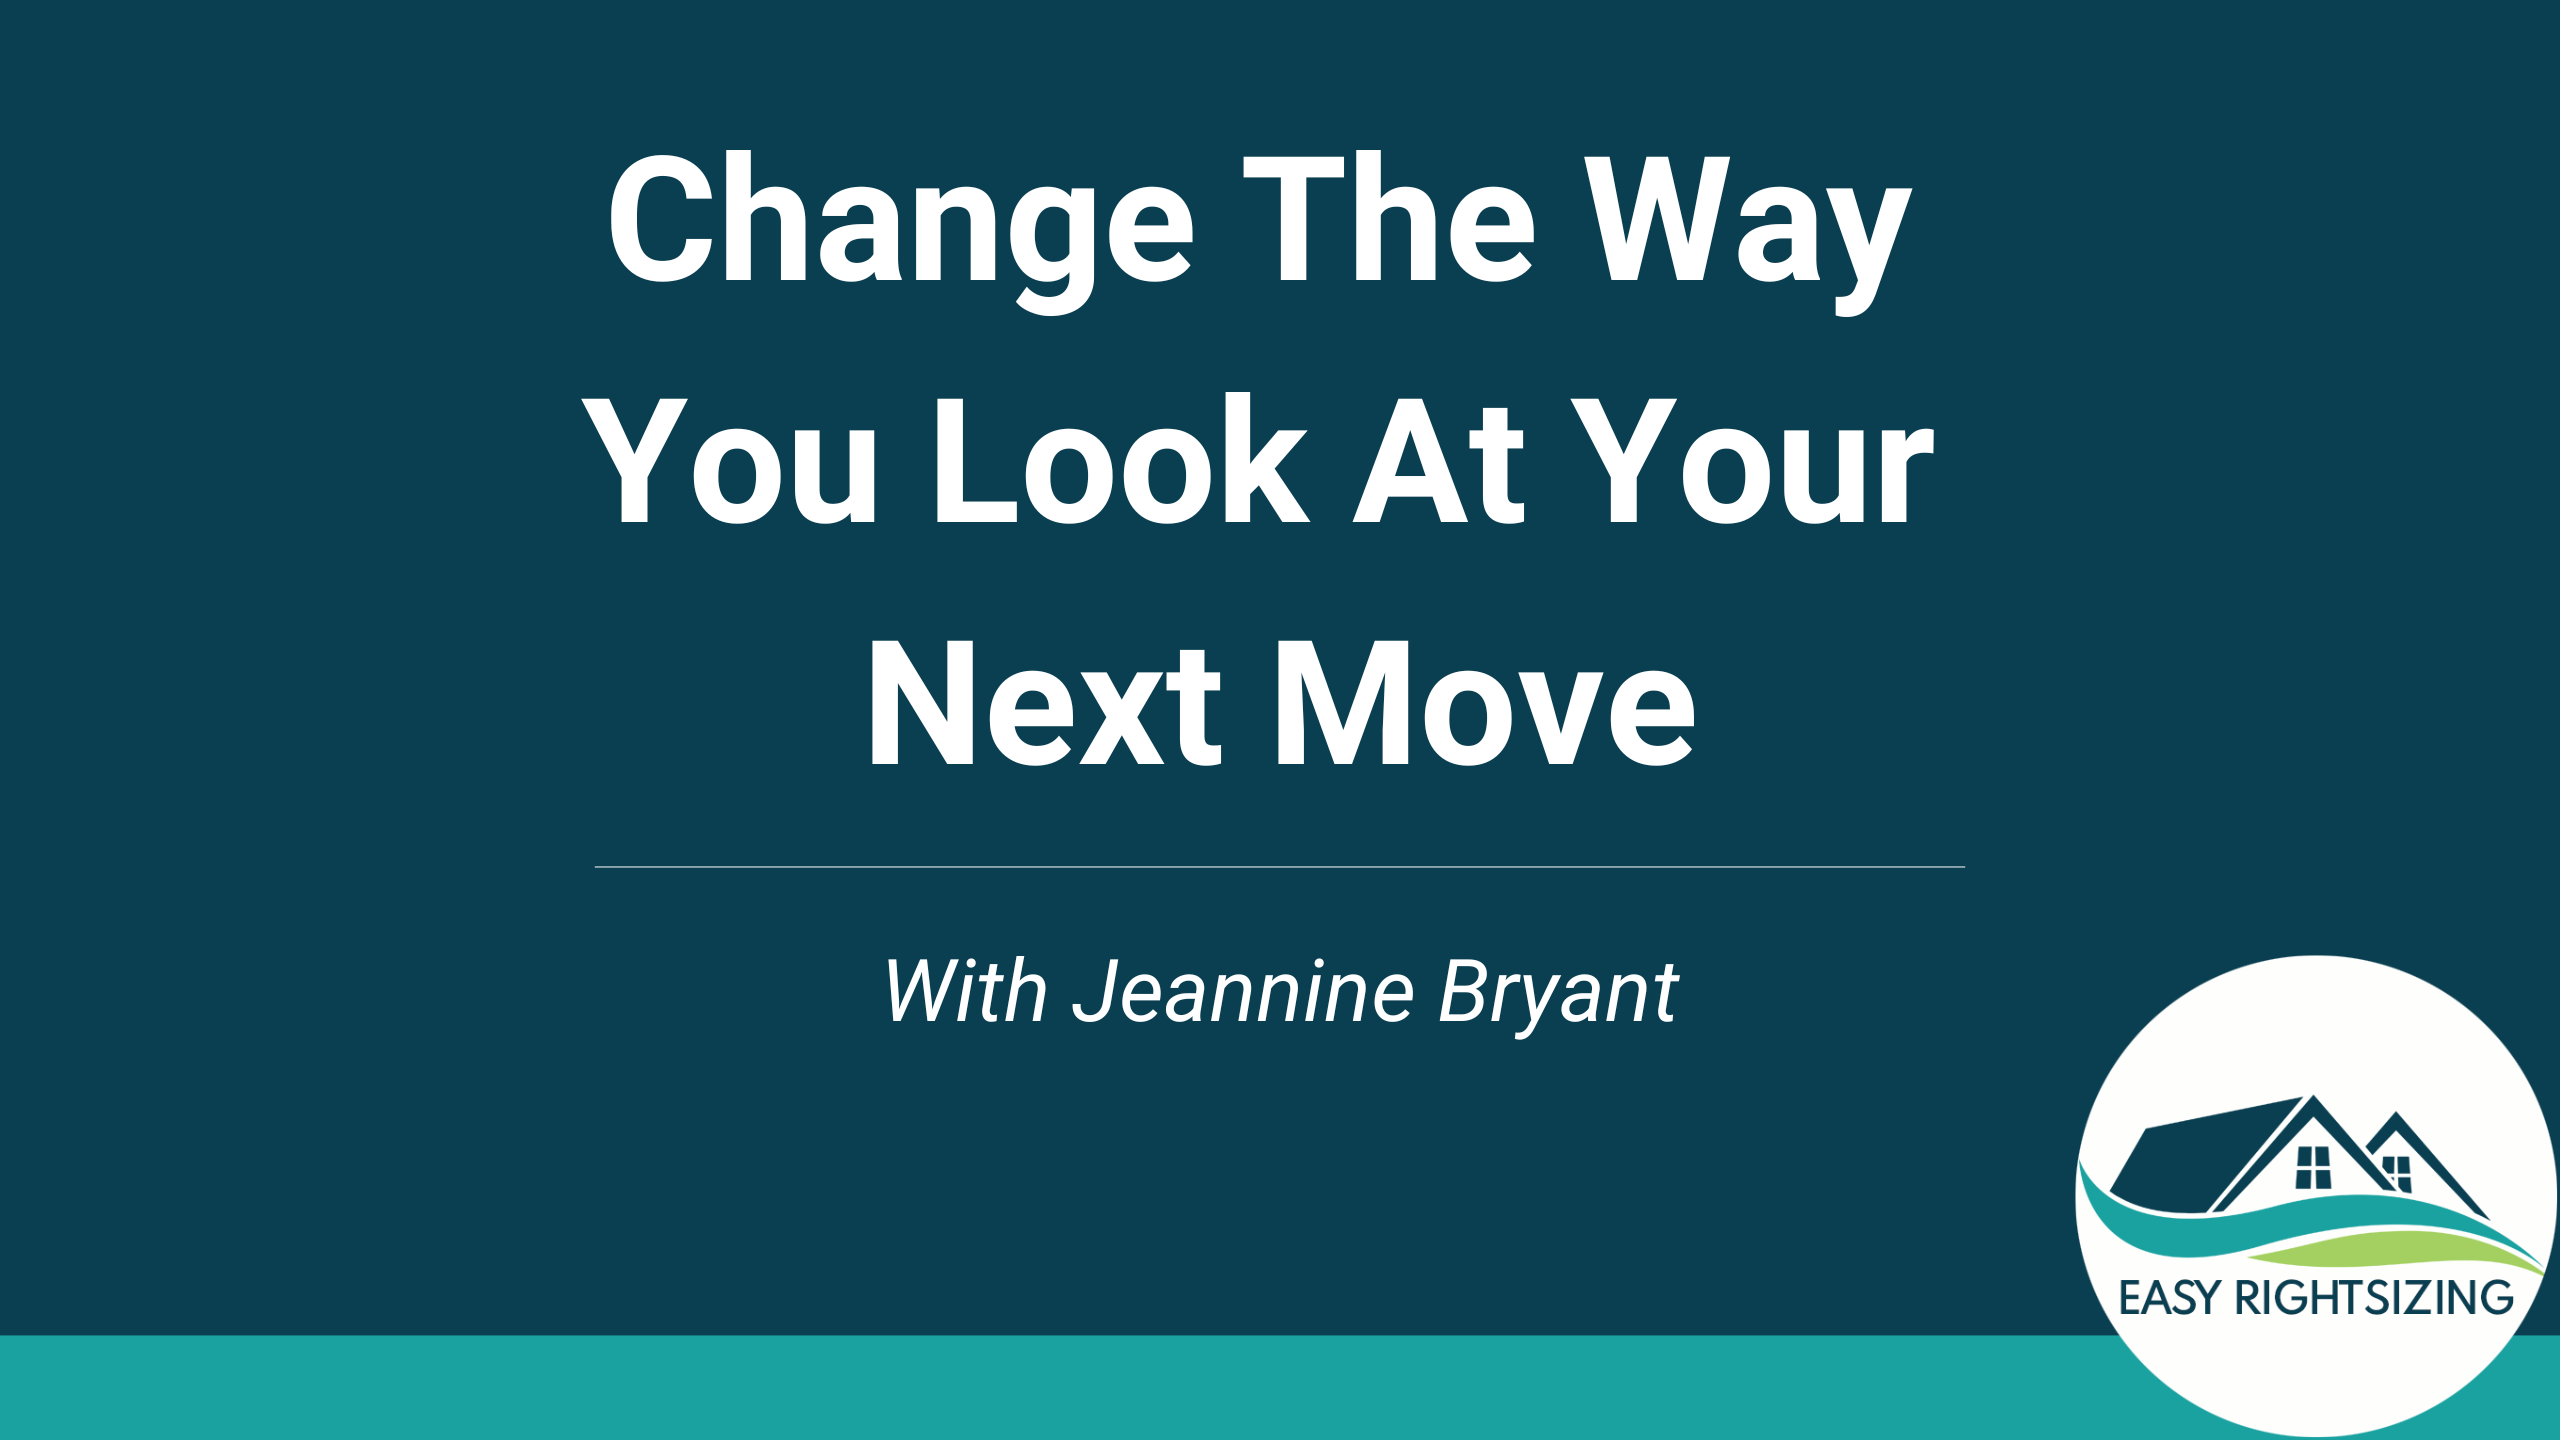 Change The Way You Look At Your Next Move